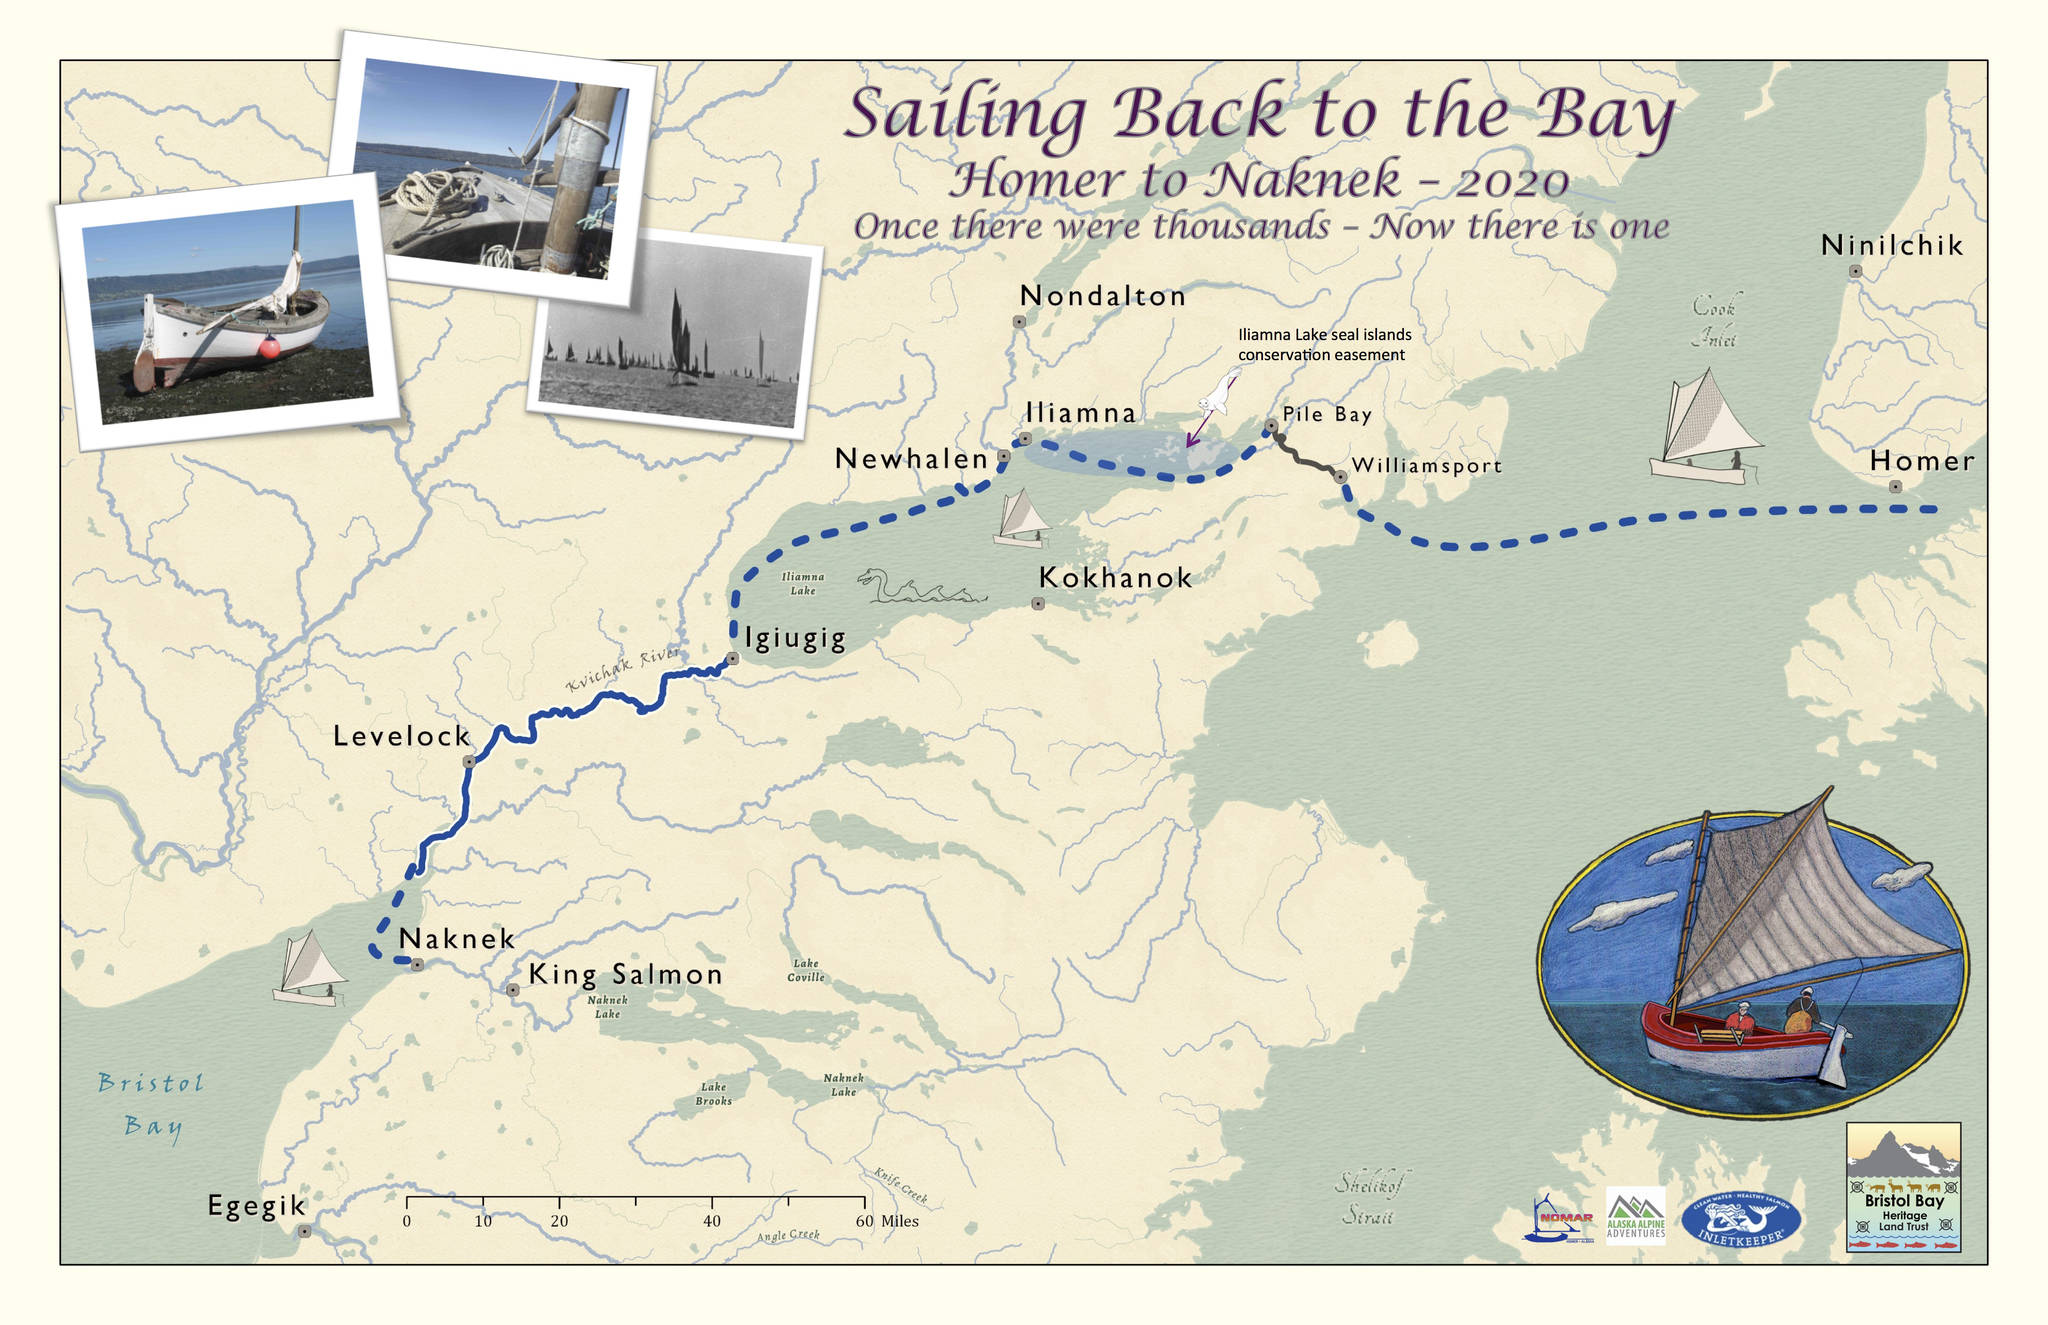 Leaving Homer during July 4, 2020, celebrations, the LML 144, a Bristol Bay sailboat once used for commercial fishing, will follow a decades-old route back to the bay, as shown here on a map showing its proposed voyage. (Map courtesy of Tim Troll)